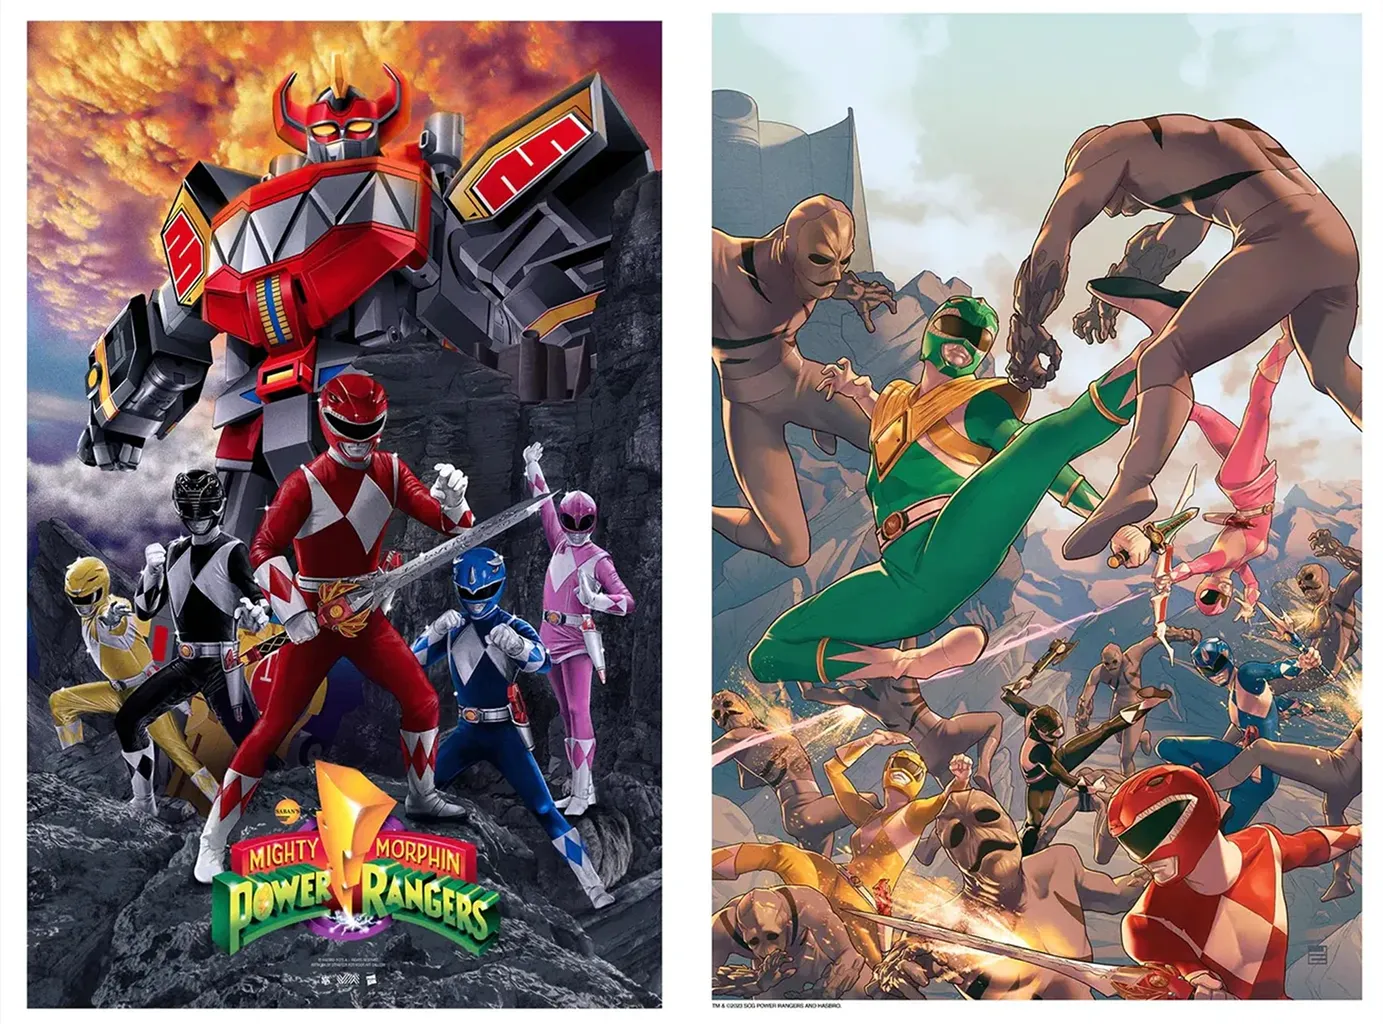 Mighty Morphin Power Rangers by Straife01 and Jamal Campbell